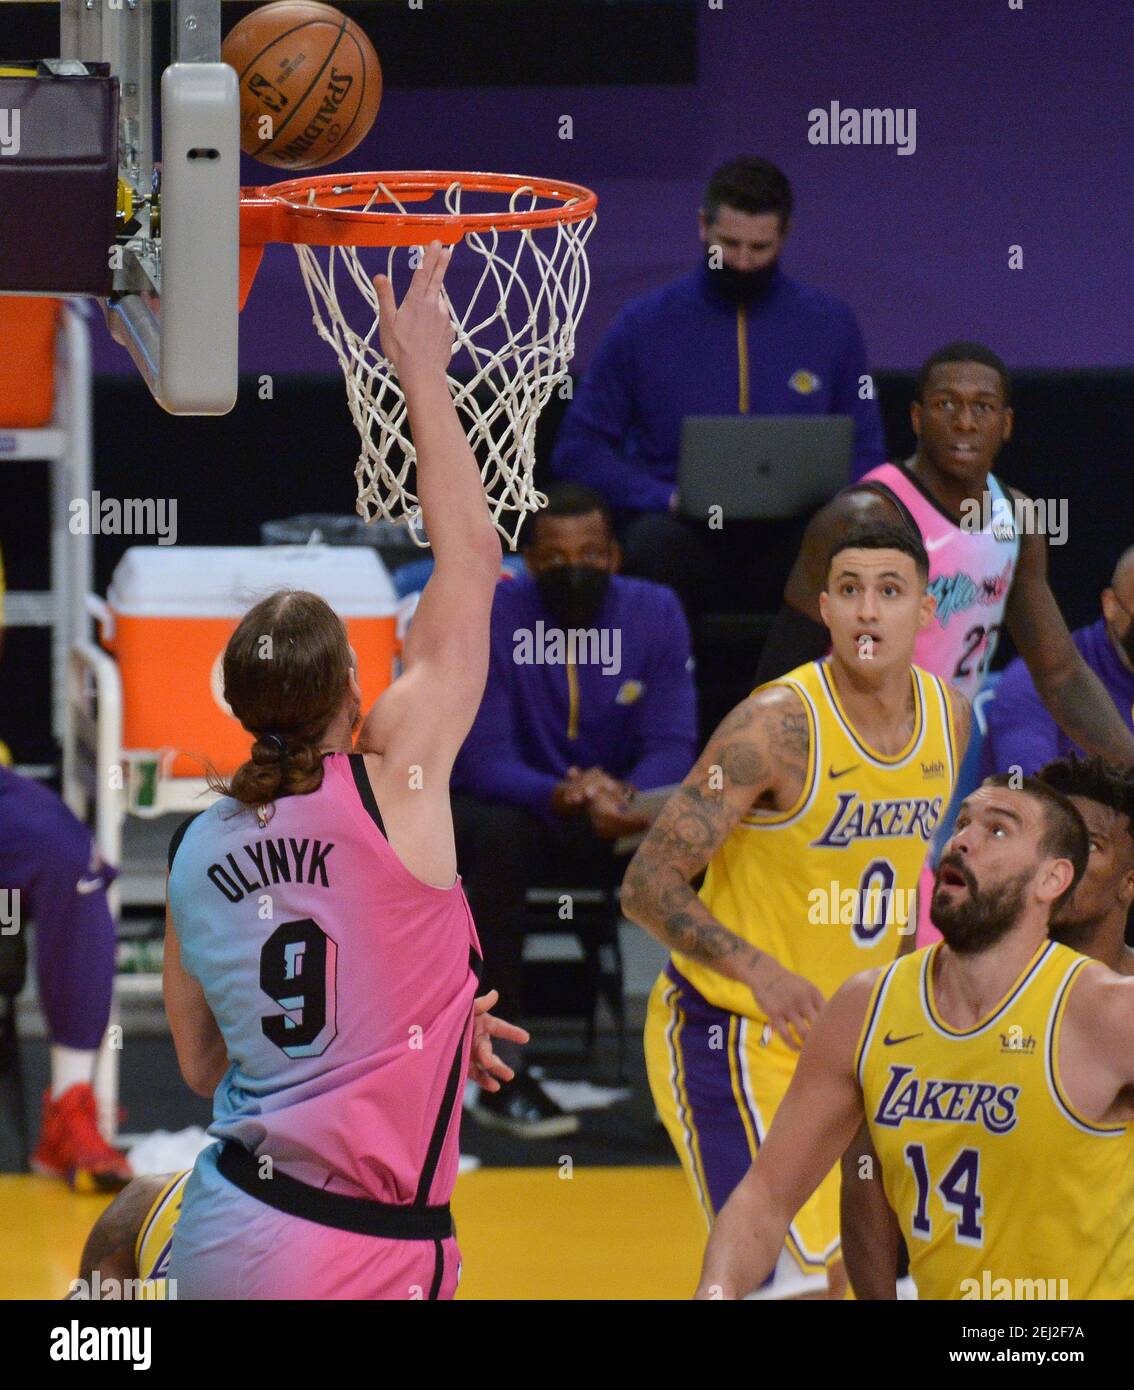 Los Angeles, United States. 20th Feb, 2021. Miami Heat center Kelly Olynyk scores on Los Angeles Lakers' center Marc Gasol during the second half at Staples Center in Los Angeles on Saturday, February 20, 2021. The Heat defeated the Lakers 96-94. Photo by Jim Ruymen/UPI Credit: UPI/Alamy Live News Stock Photo